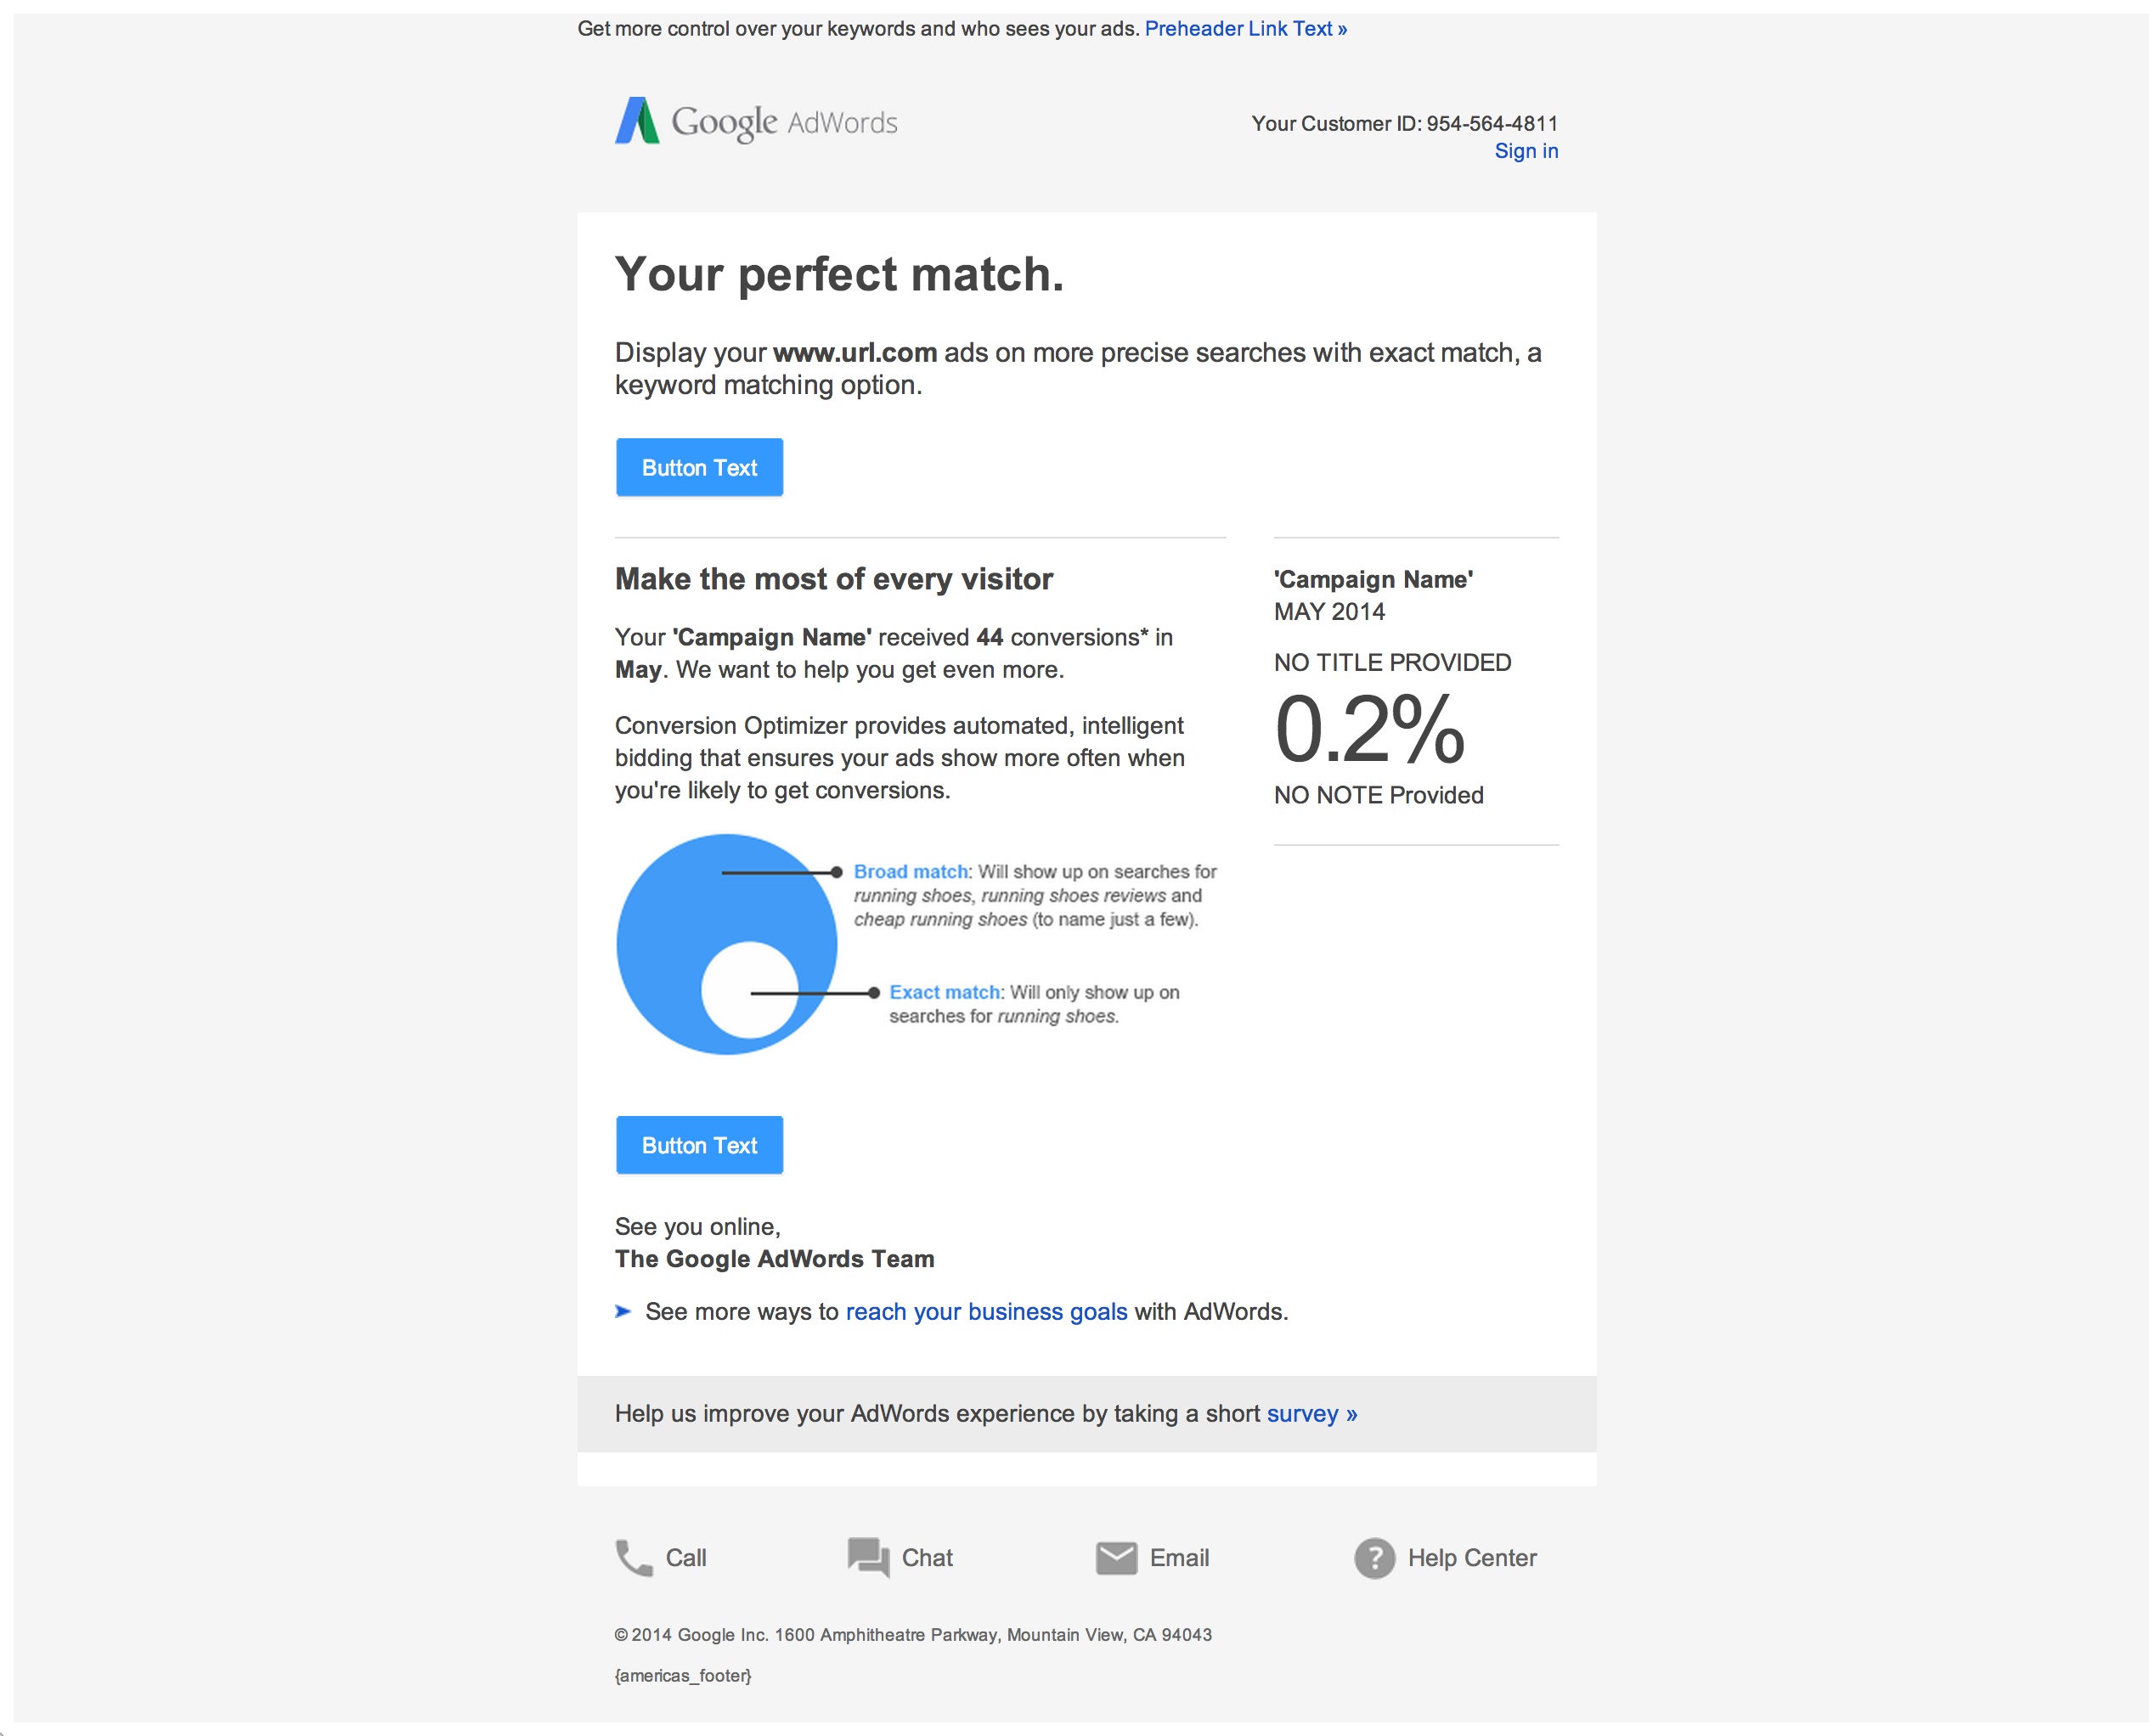 Boe Gatiss - 'Your Perfect Match' Email for Google AdWords